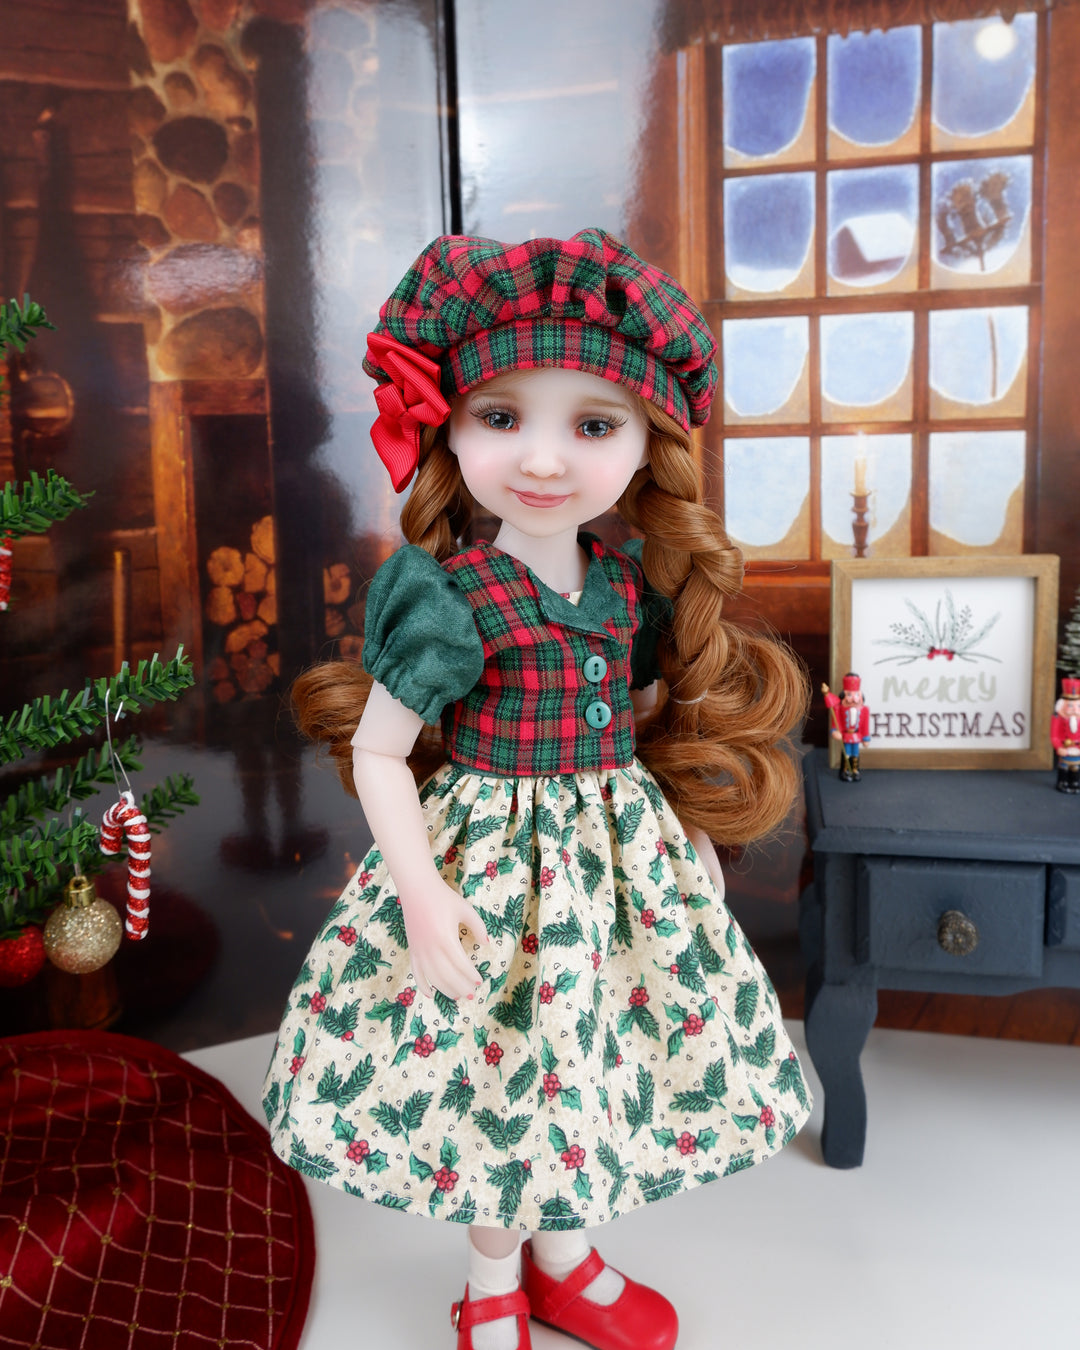 Holly Doodles - dress & jacket with shoes for Ruby Red Fashion Friends doll